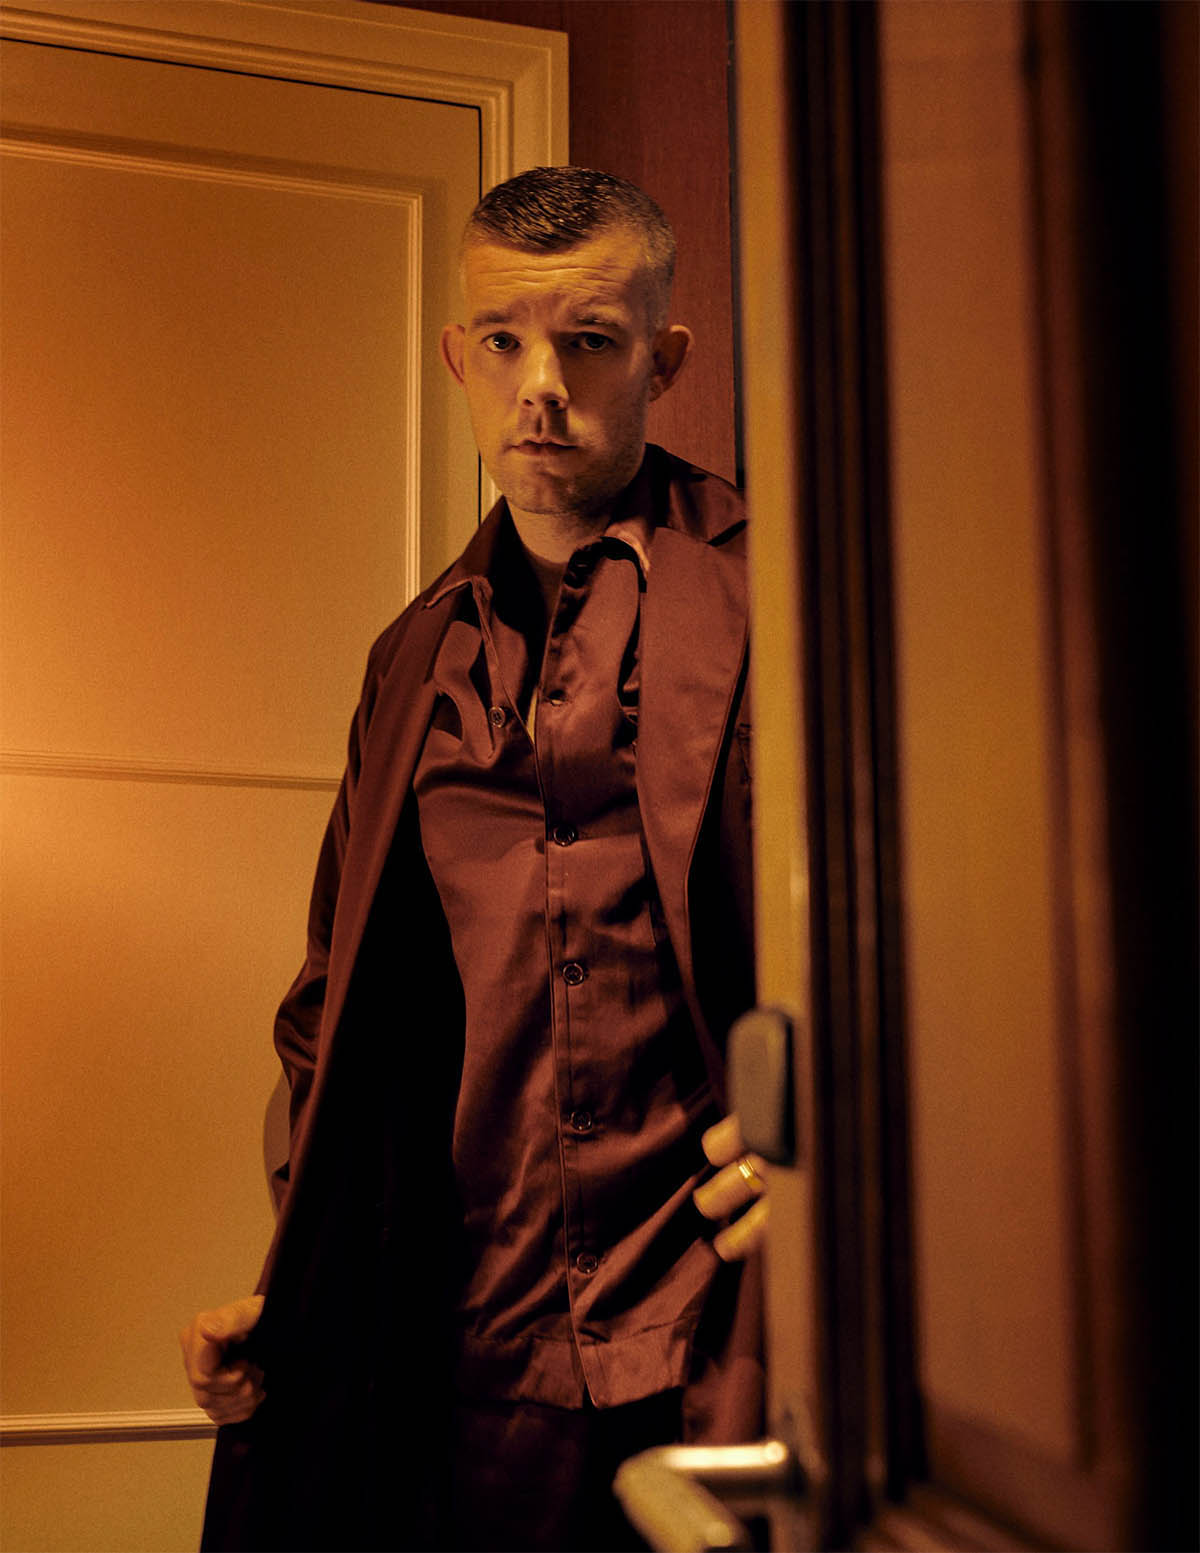 Russell Tovey covers Man of Metropolis January 2021 by Joseph Sinclair